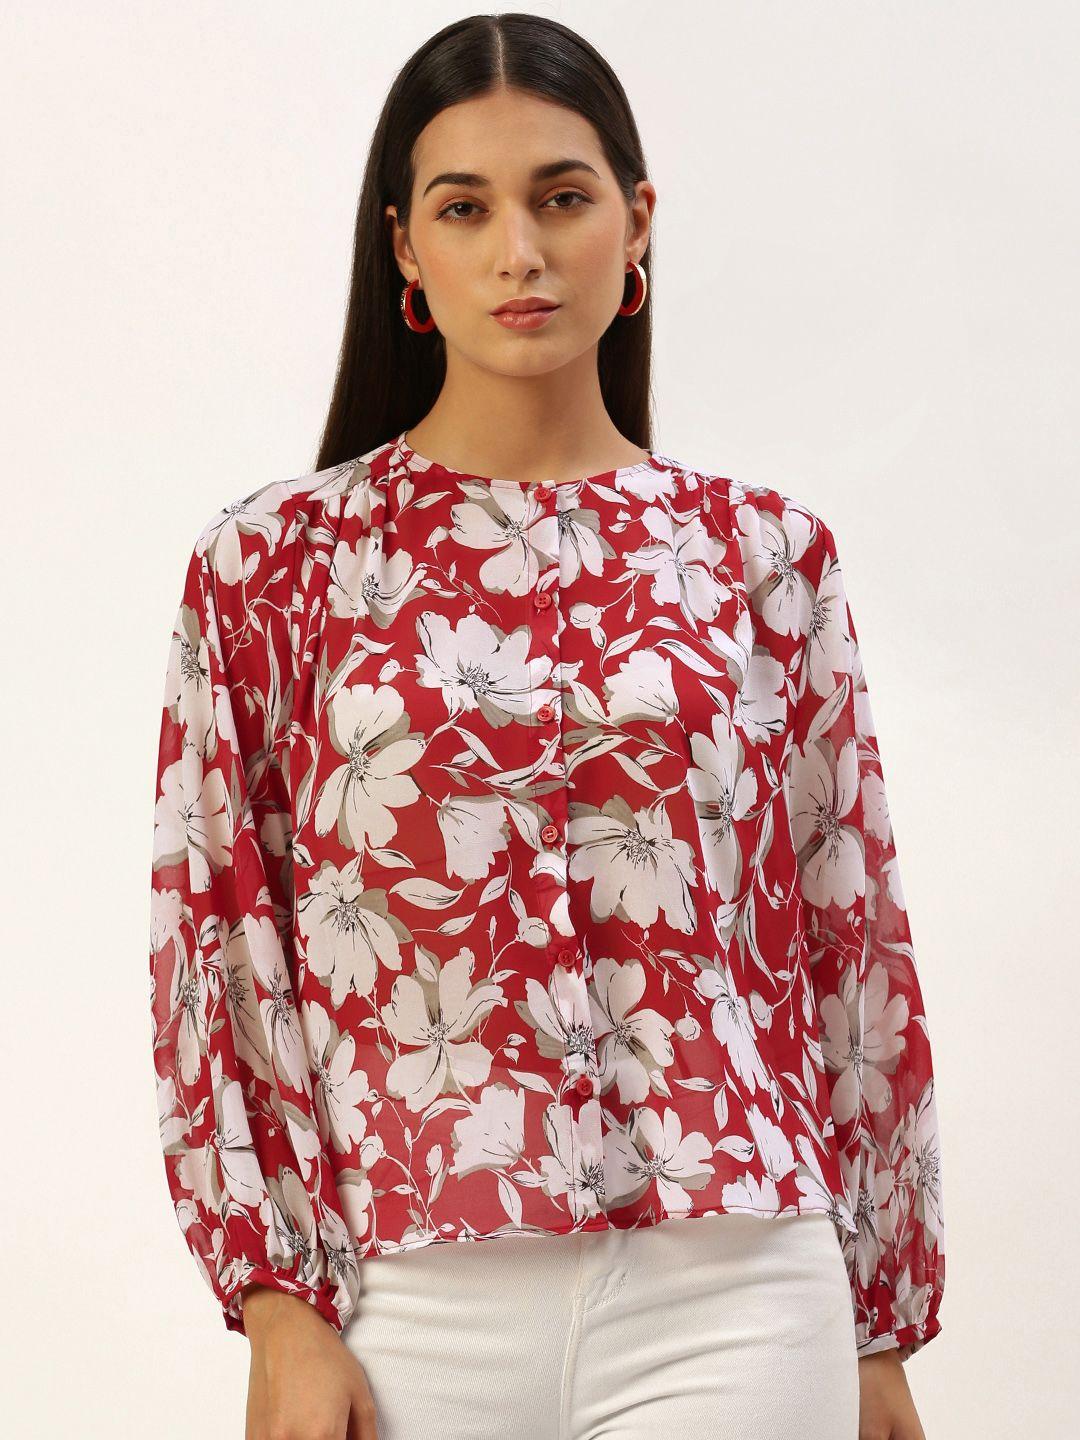 roving-mode-floral-print-georgette-shirt-style-top